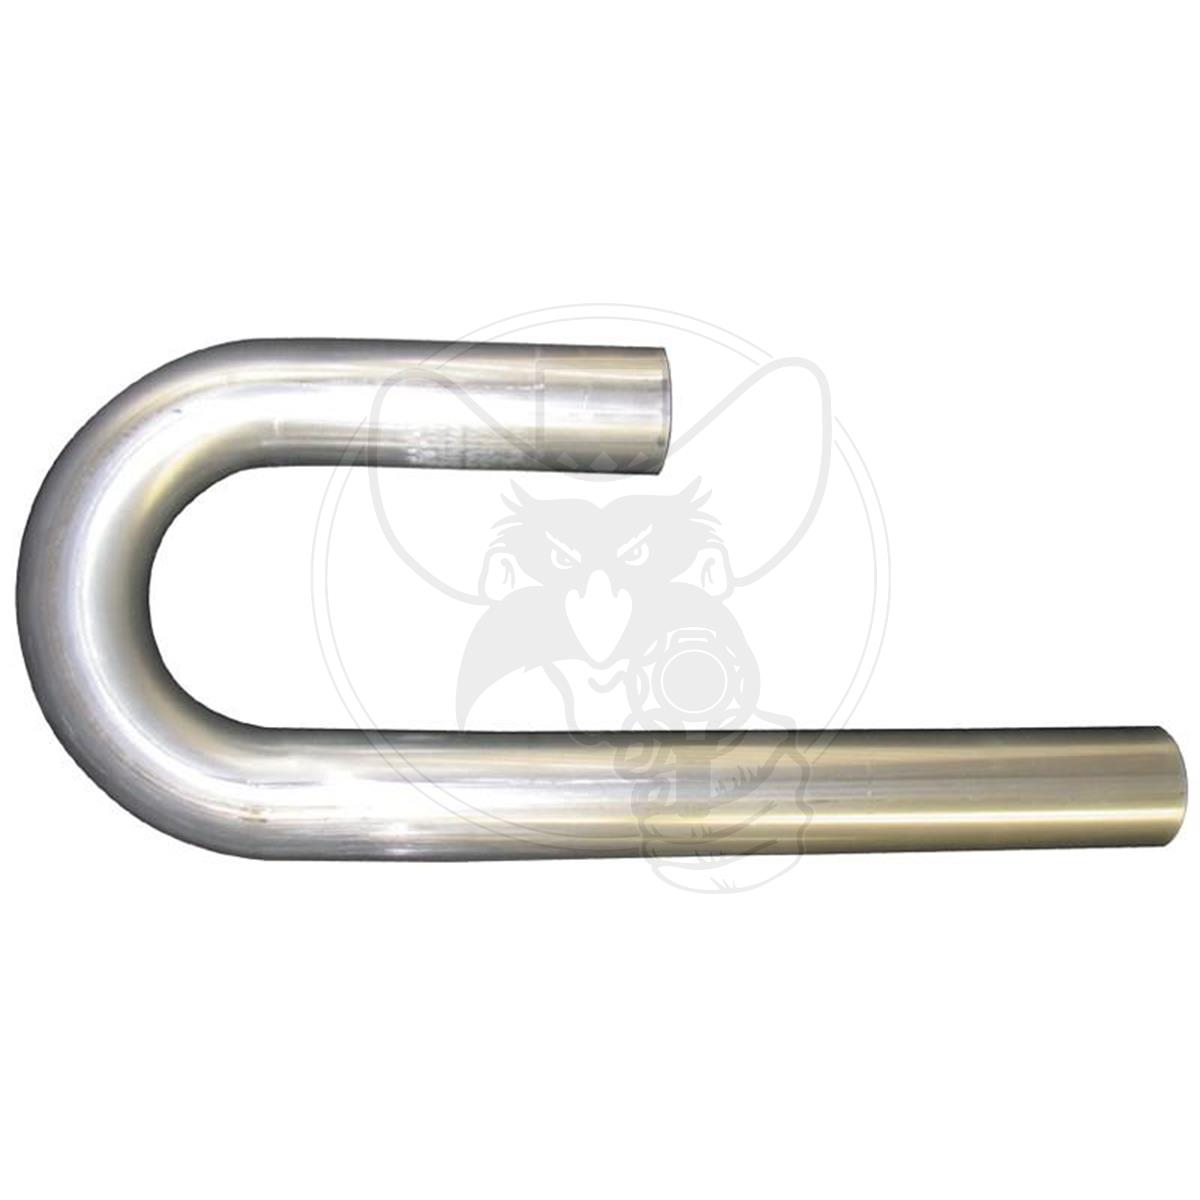 AEROFLOW 180° Stainless J-Bend Tubing 1-5/8" OD WITH 6" & 12" LEGS